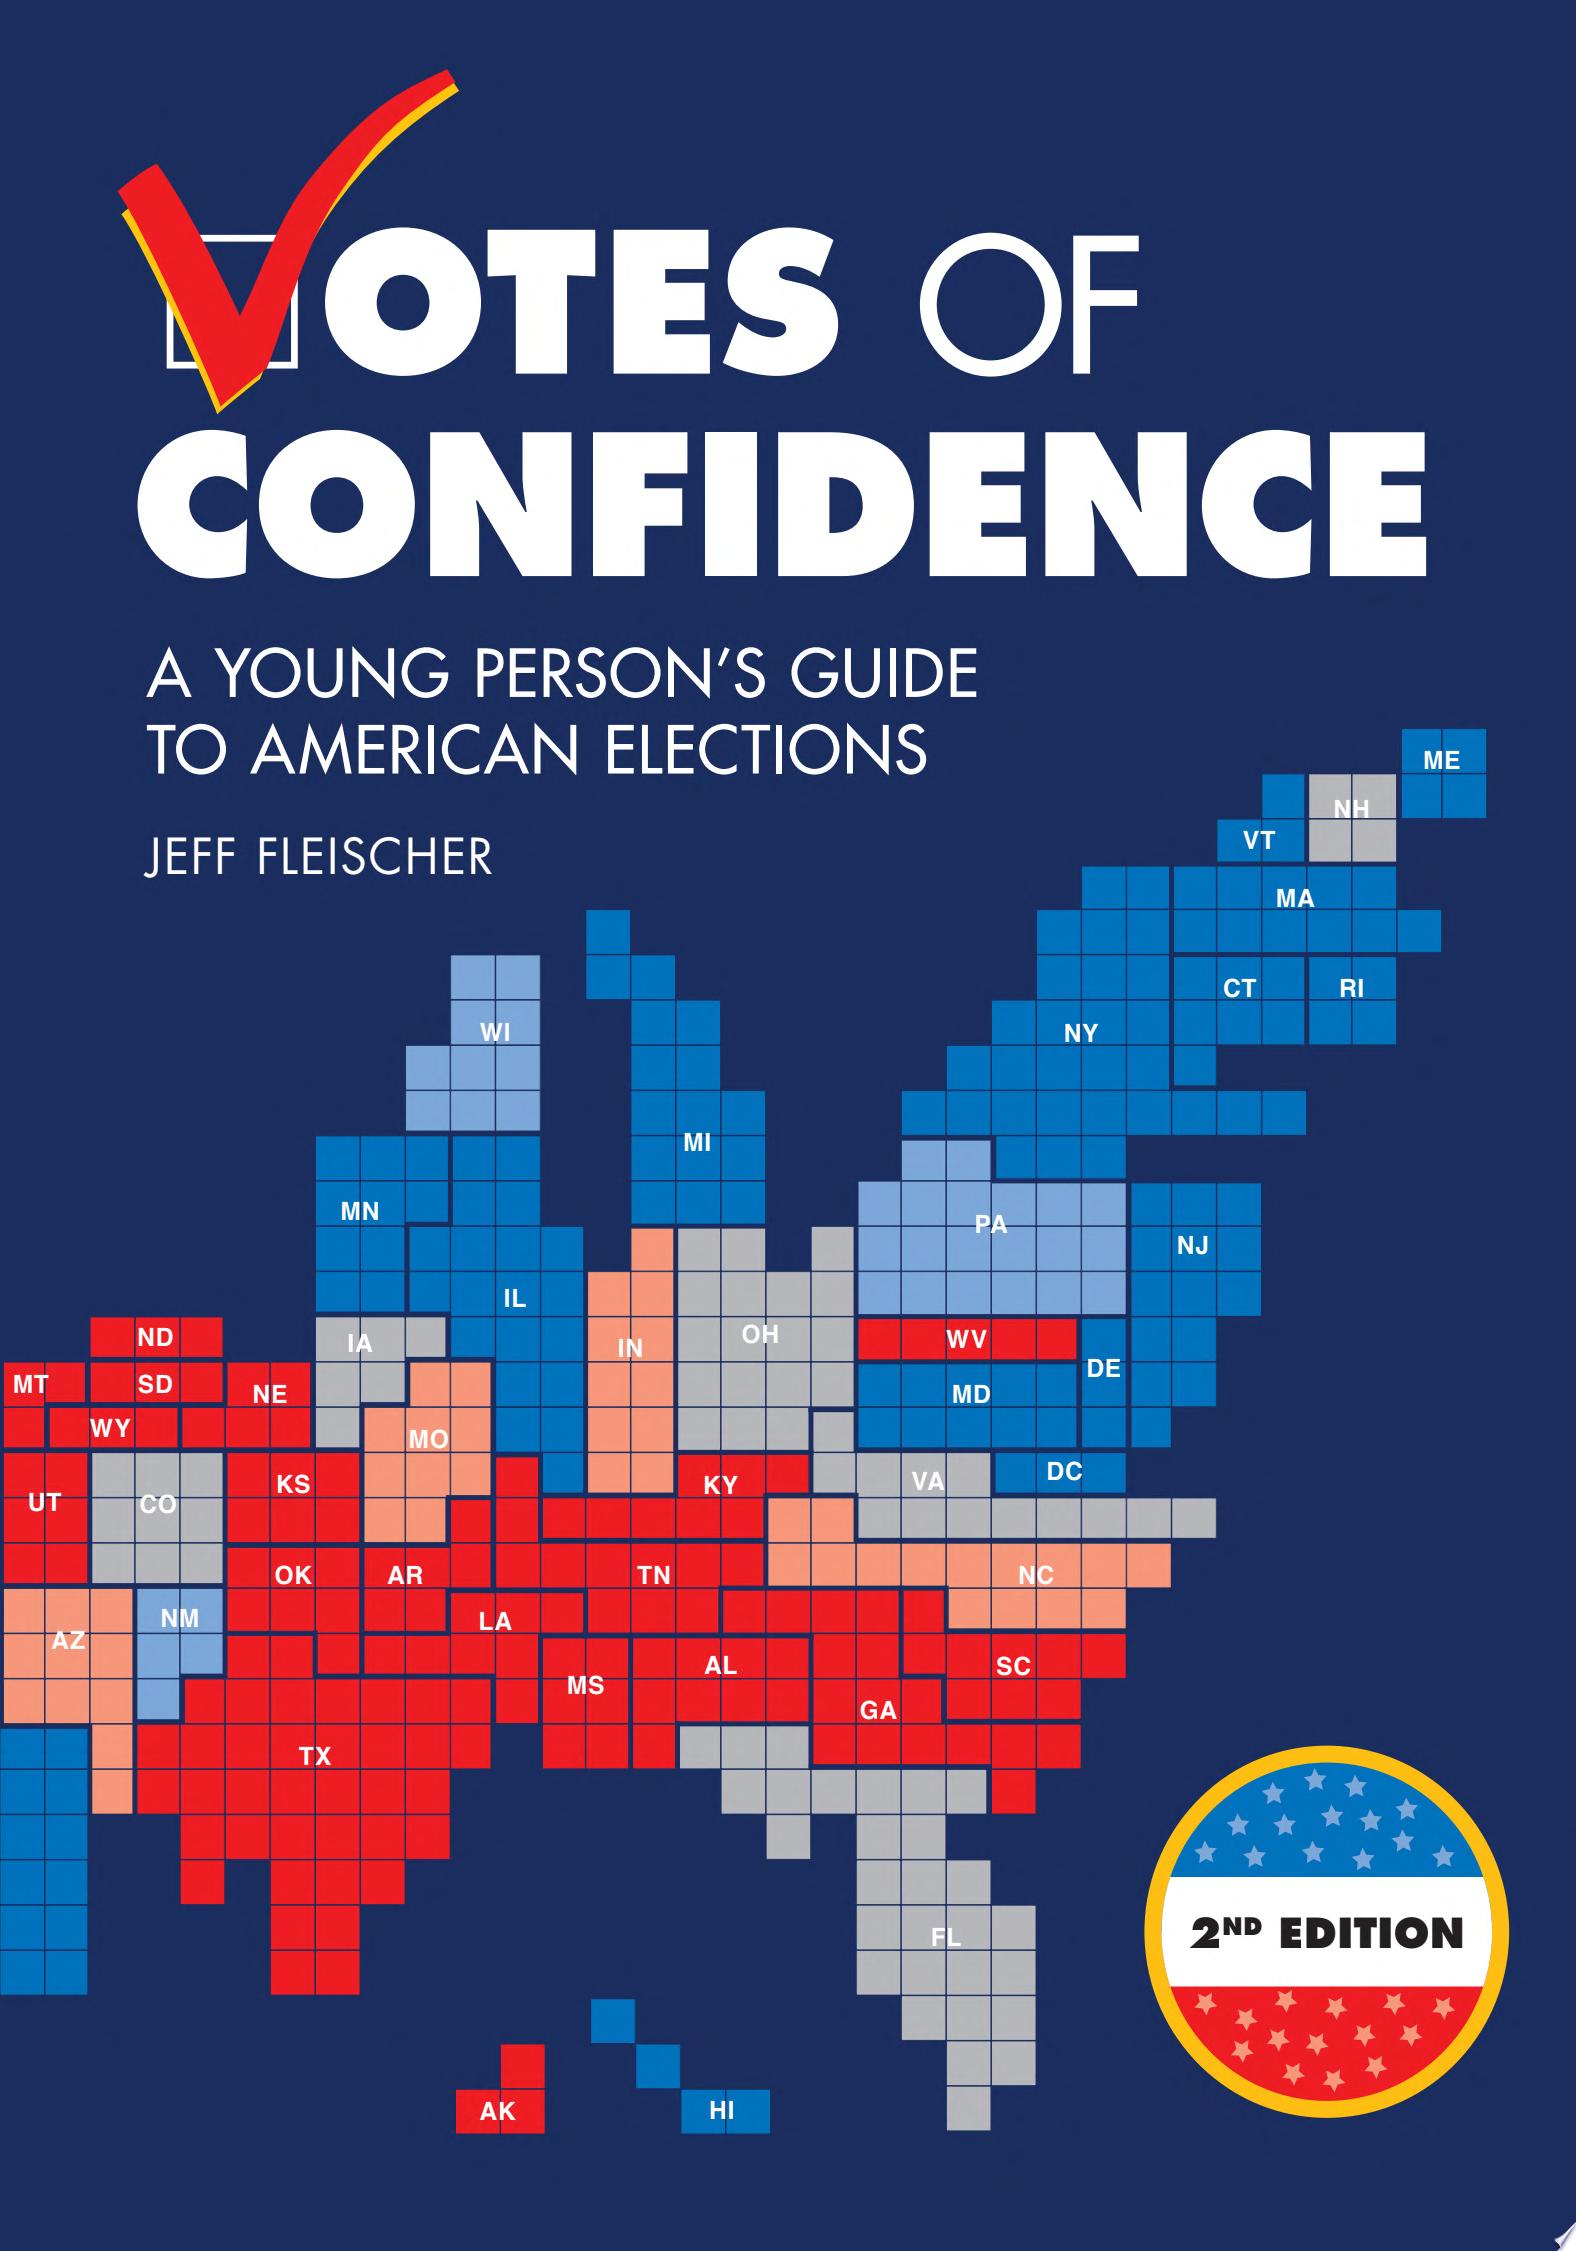 Image for "Votes of Confidence, 2nd Edition"